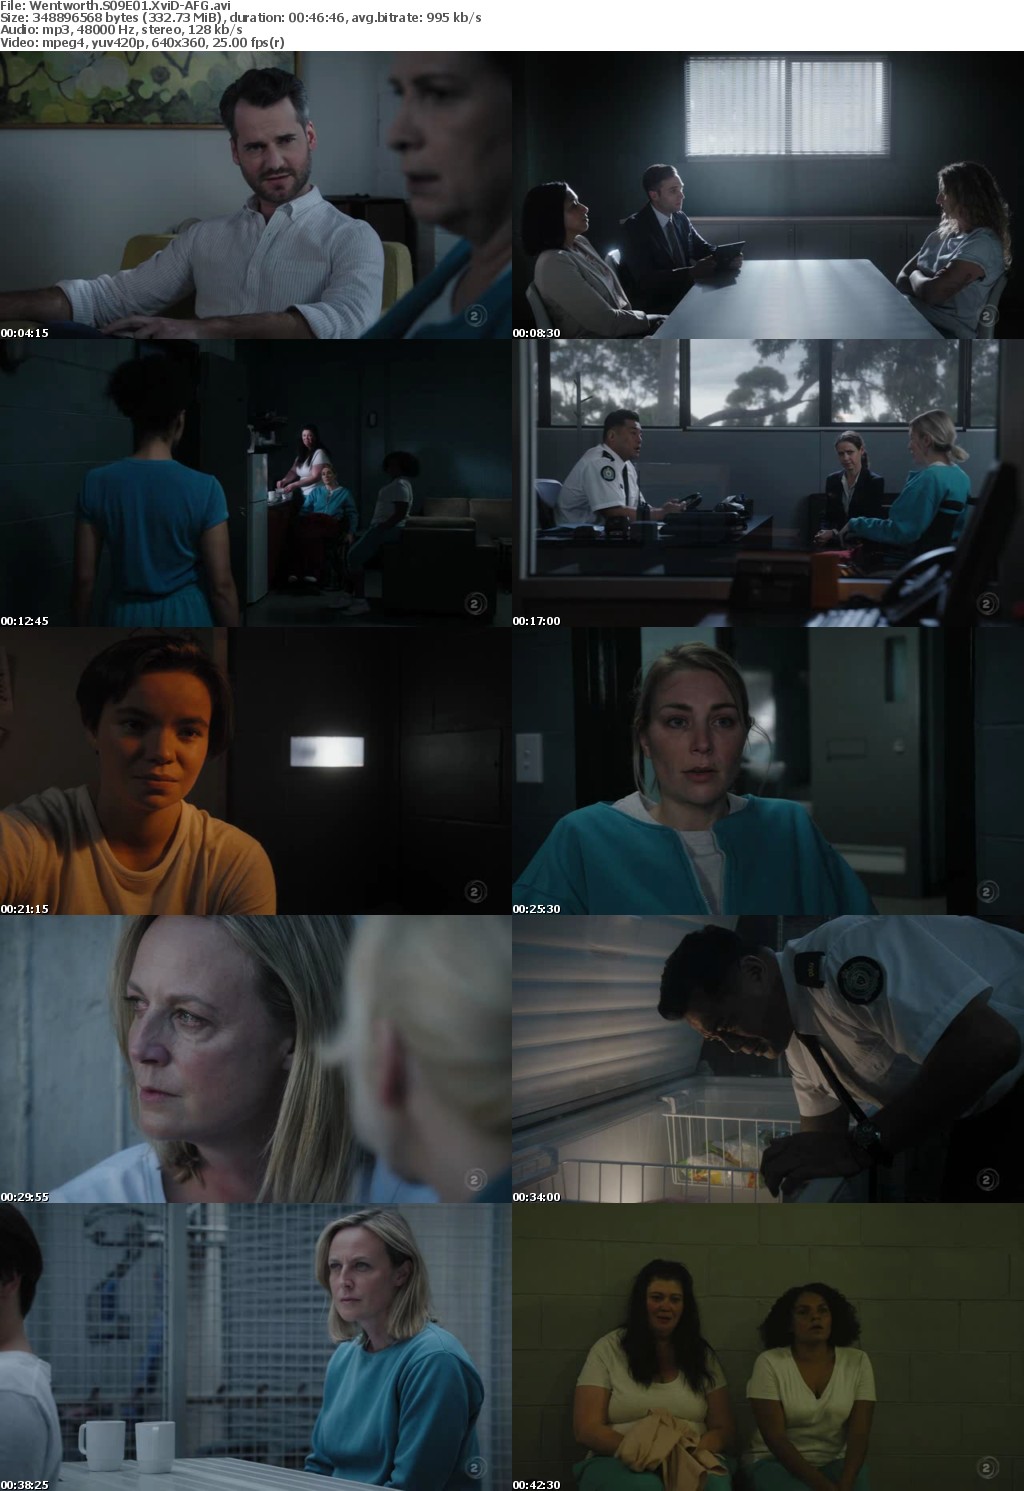 Wentworth S09E01 XviD-AFG